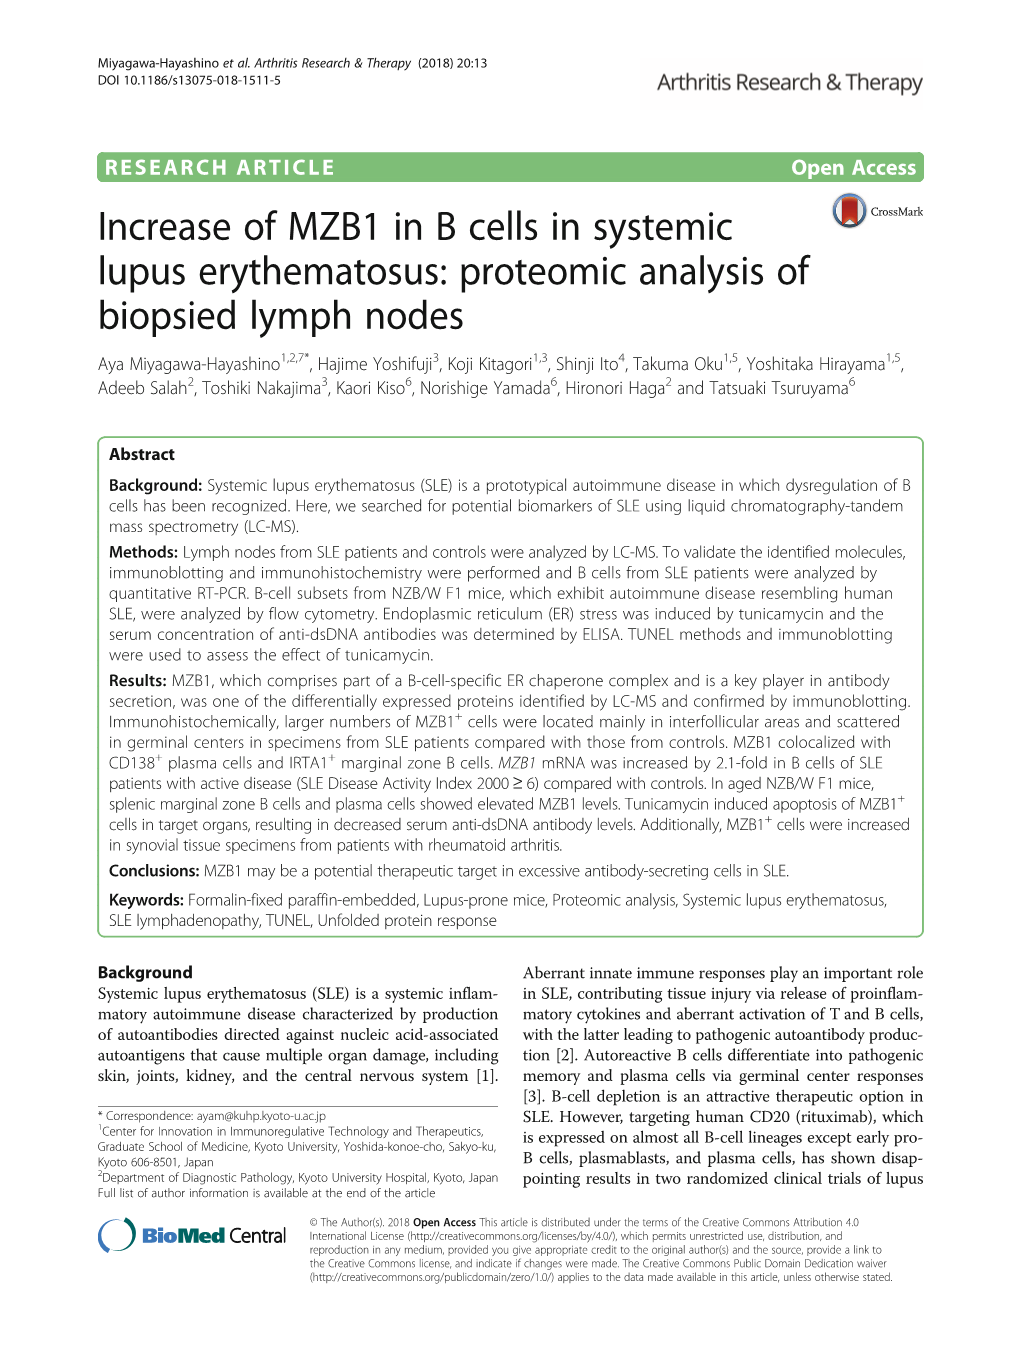 Increase of MZB1 in B Cells in Systemic Lupus Erythematosus